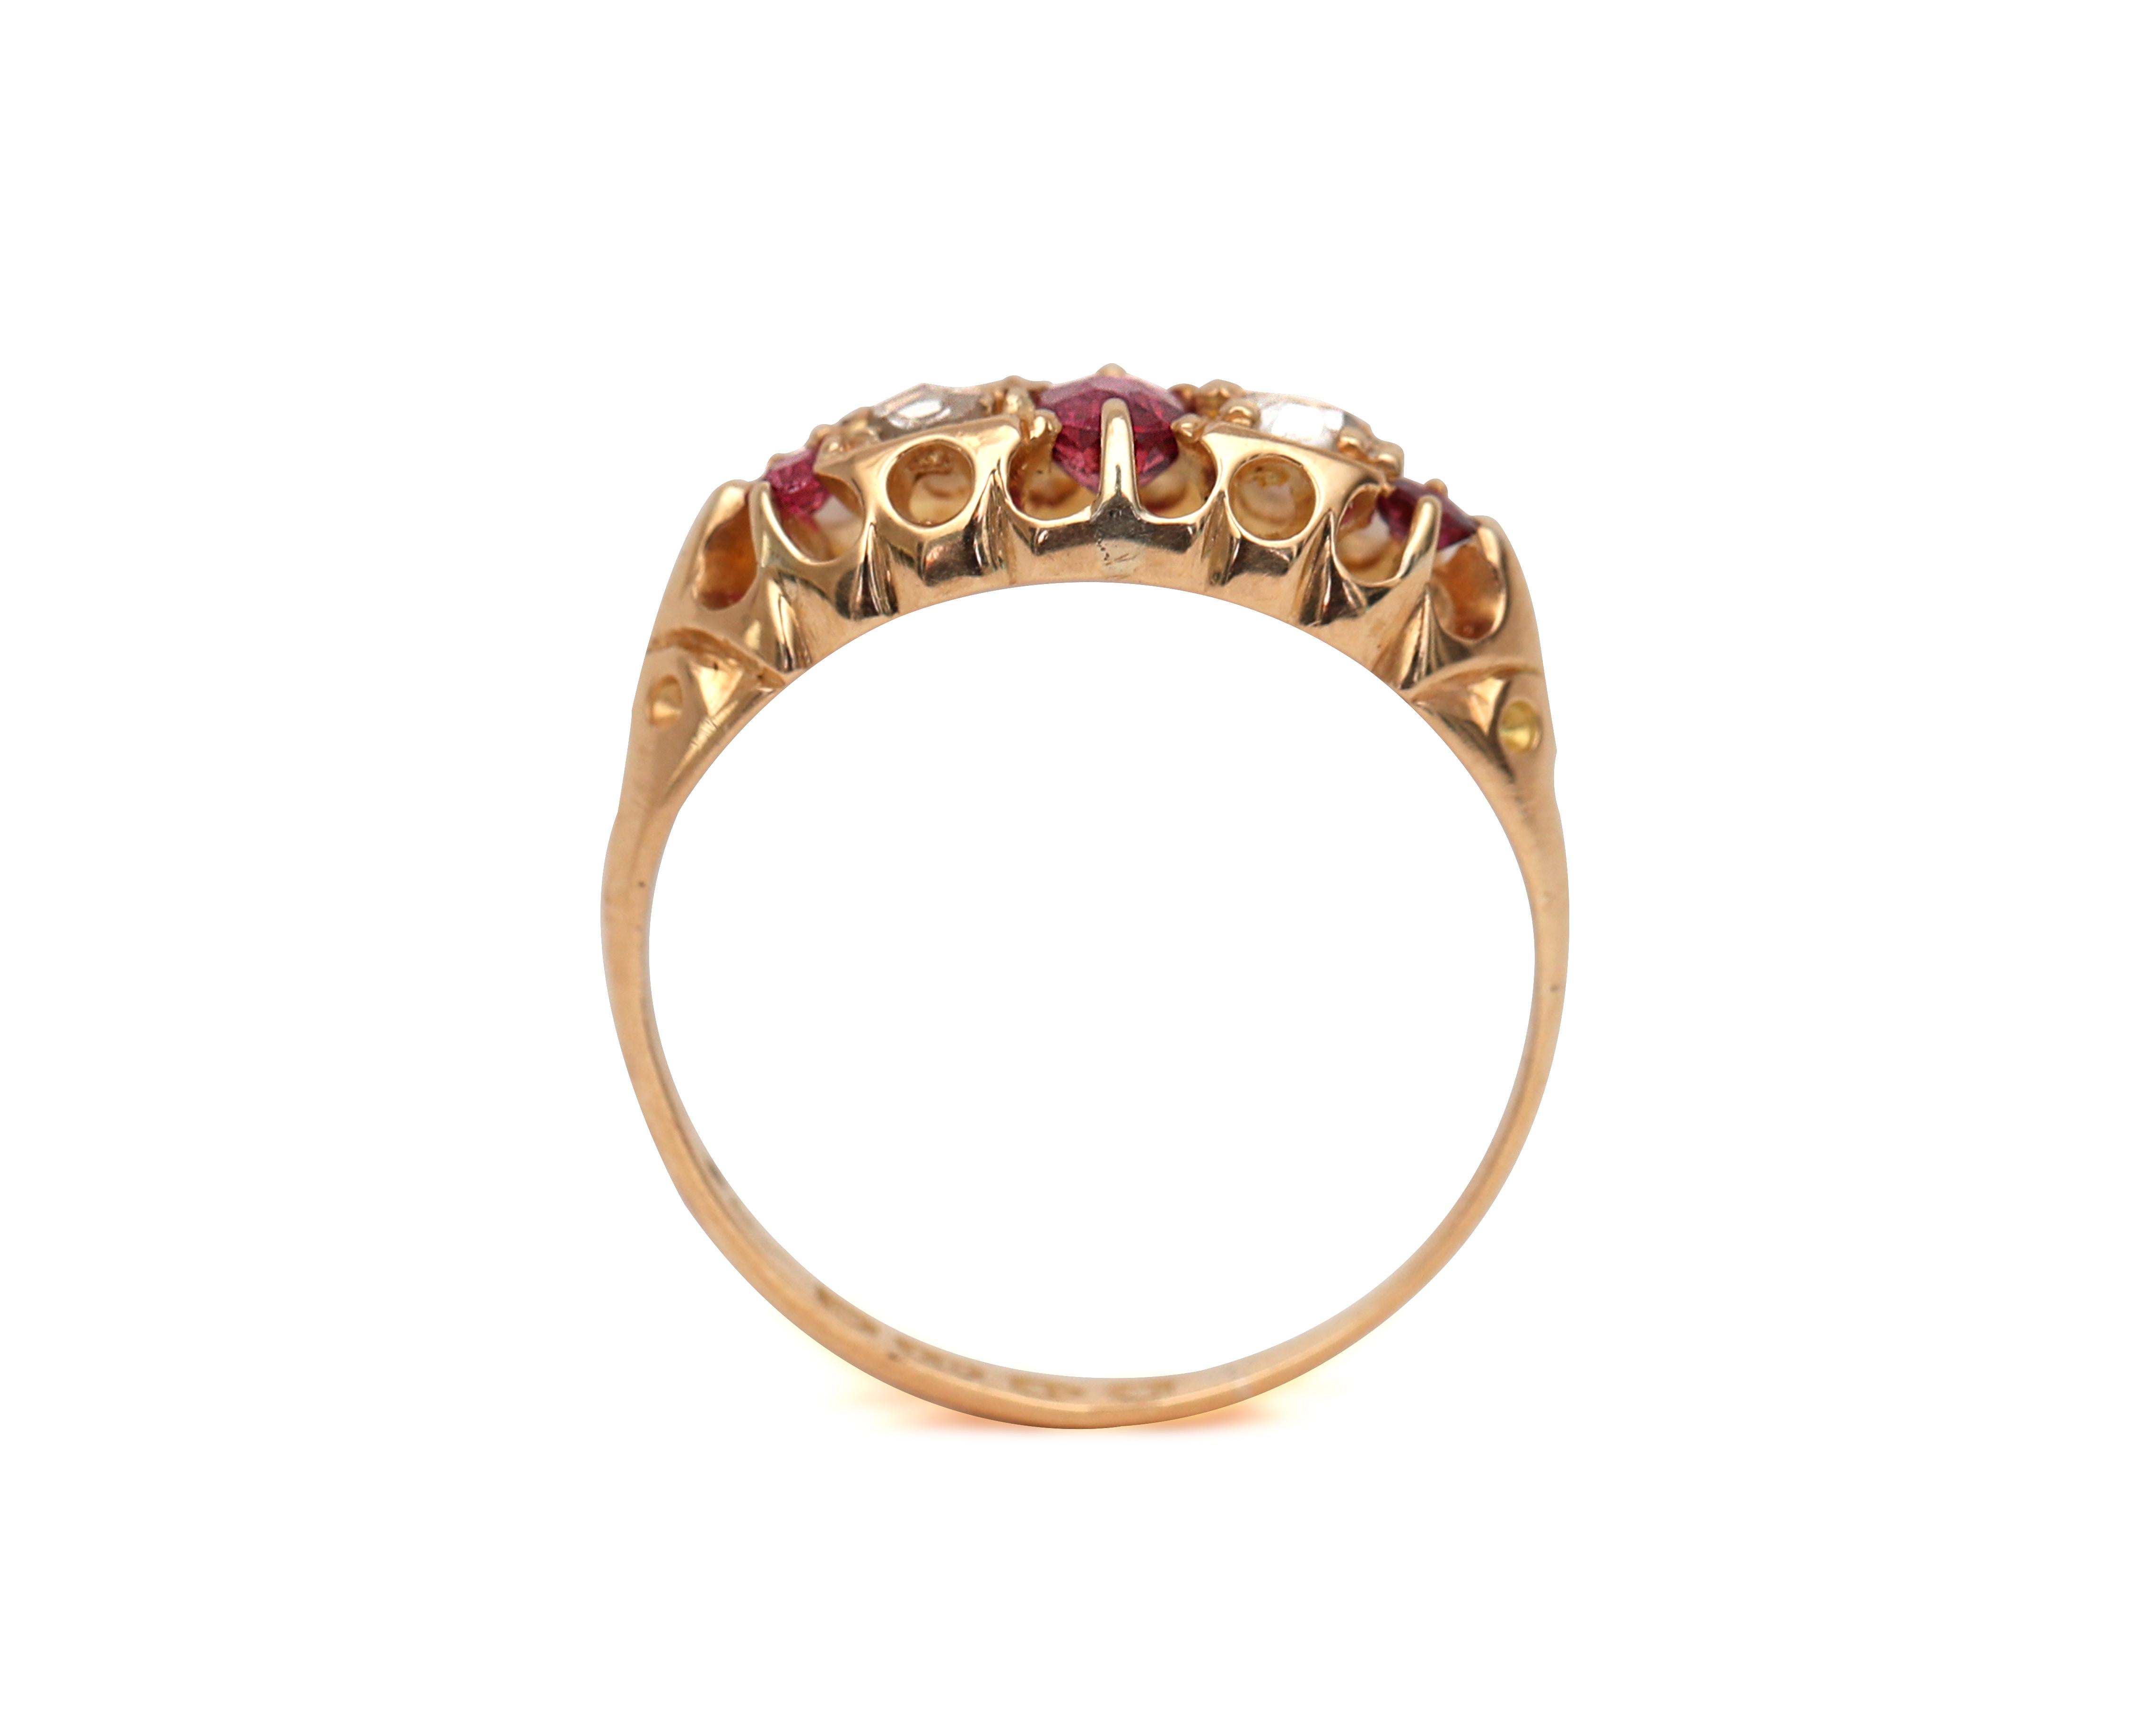 Rose Cut Late Victorian British Ruby and Diamond Ring, 18 Karat Gold with Hang Engraving